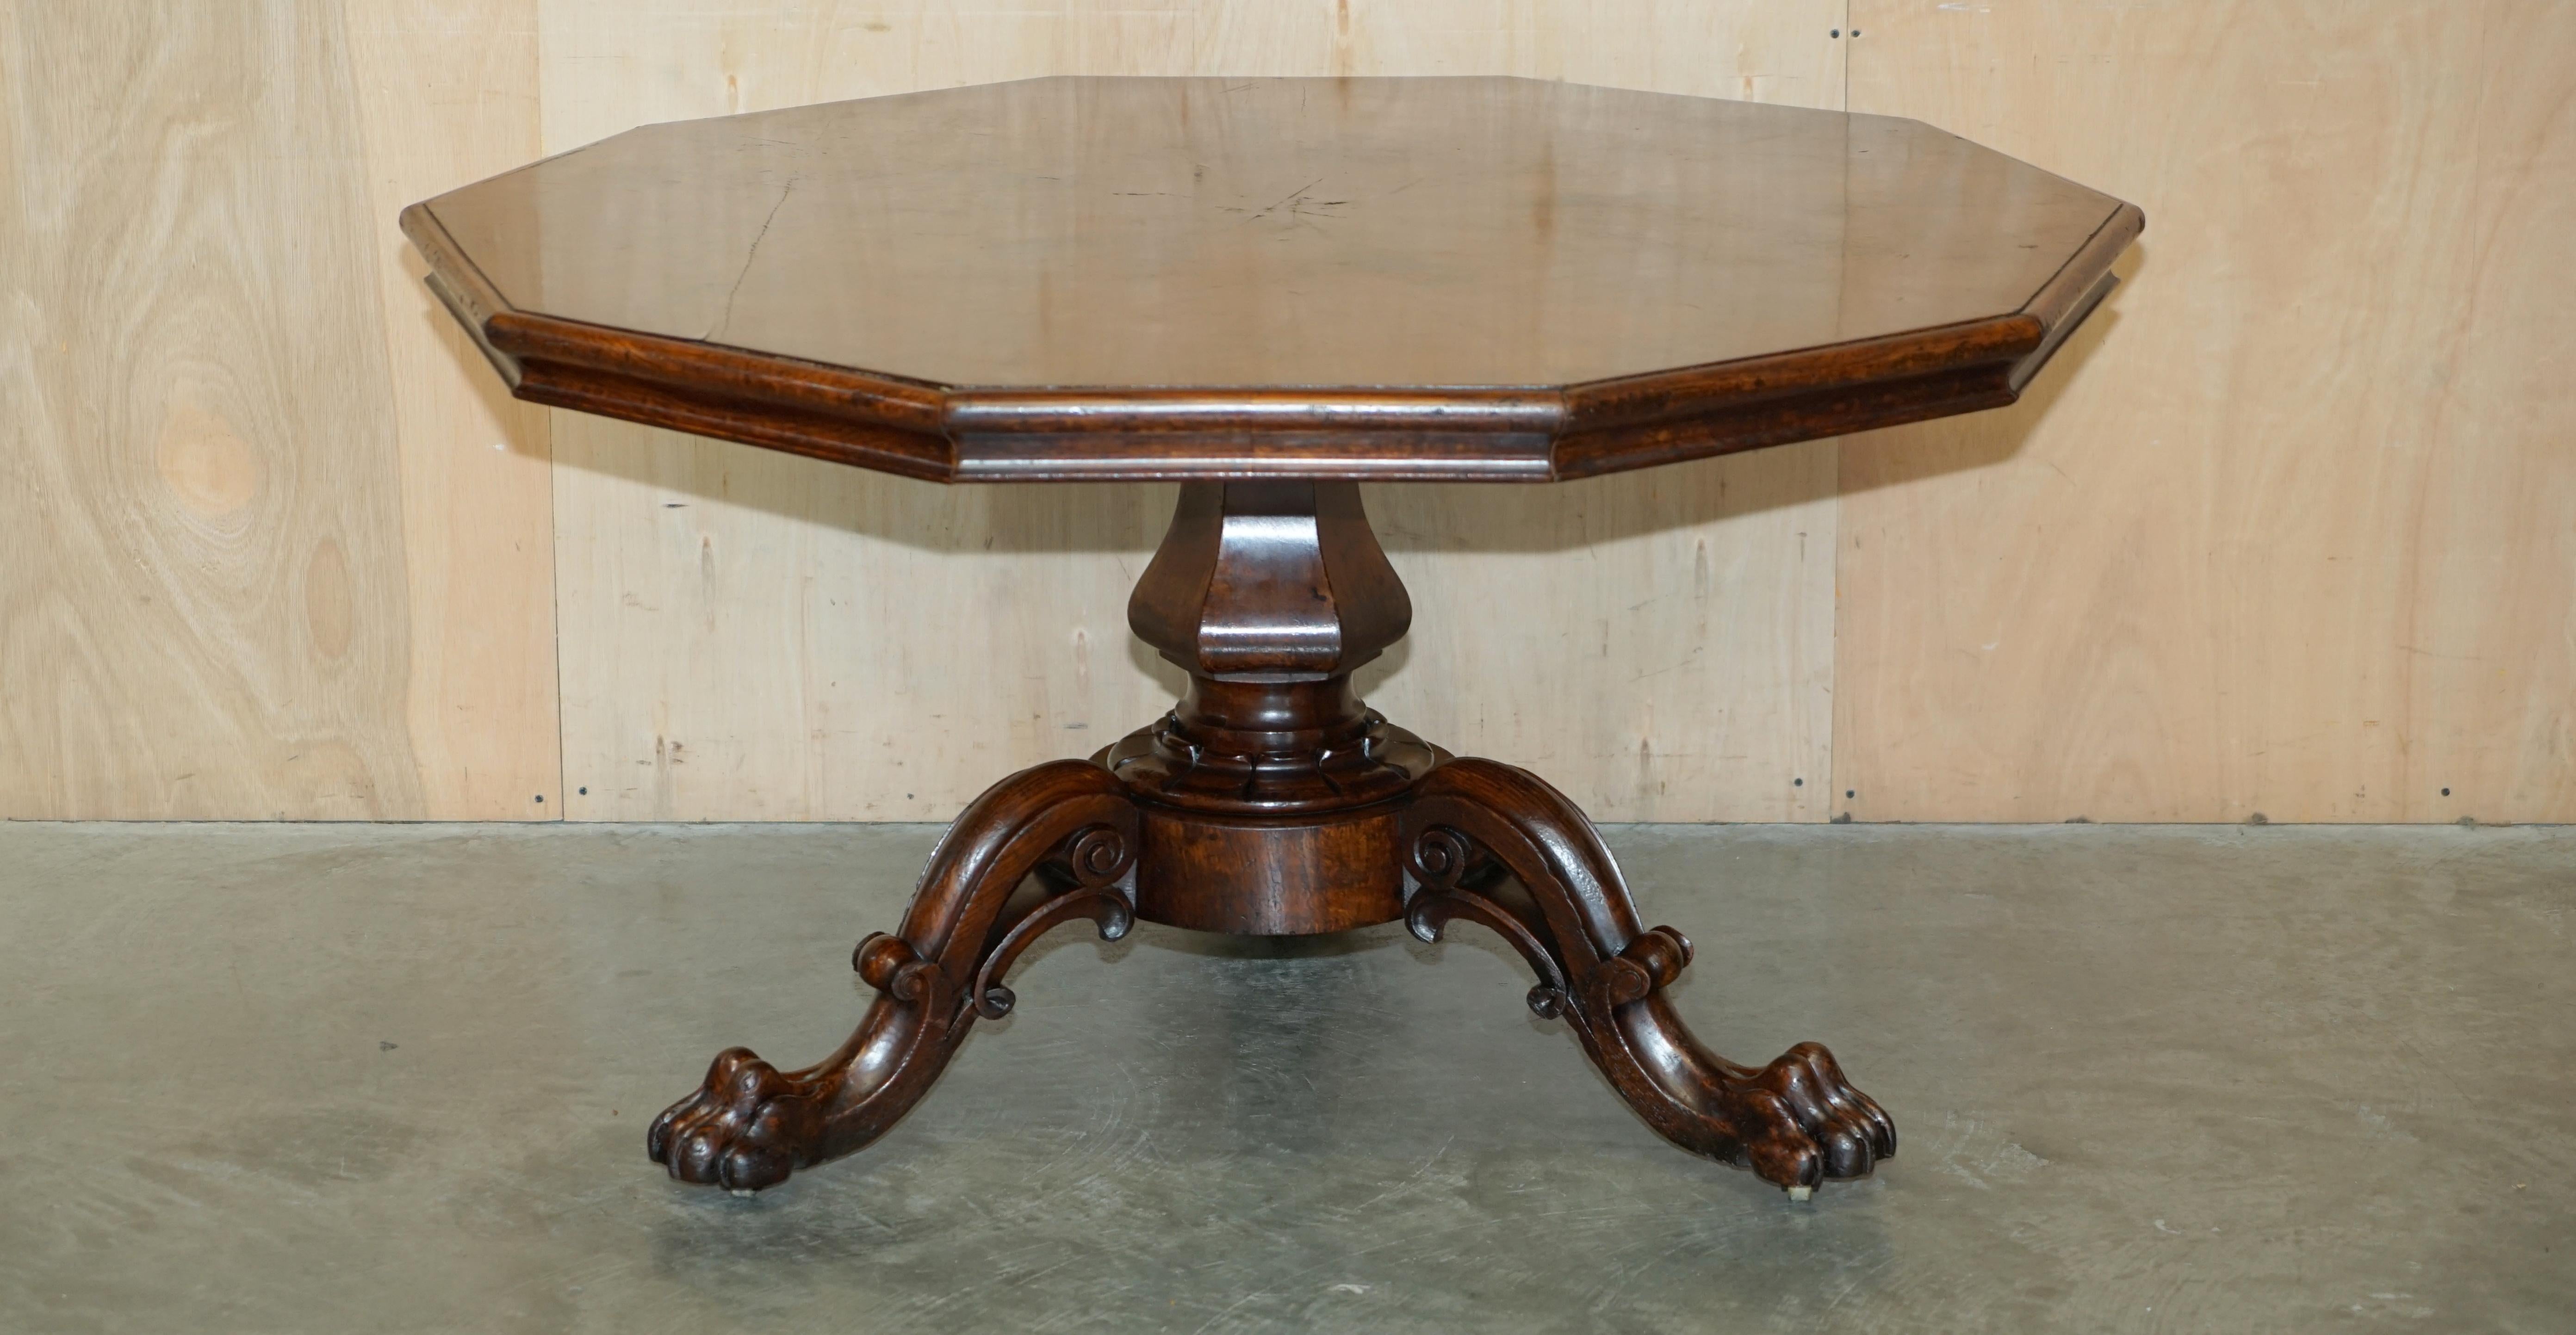 Royal House Antiques

Royal House Antiques is delighted to offer for sale this exquisite Victorian circa 1880 Lamb's of Manchester Burr Walnut tilt top dining or occasional table with hand carved lions hairy paw feet and original castors 

Please